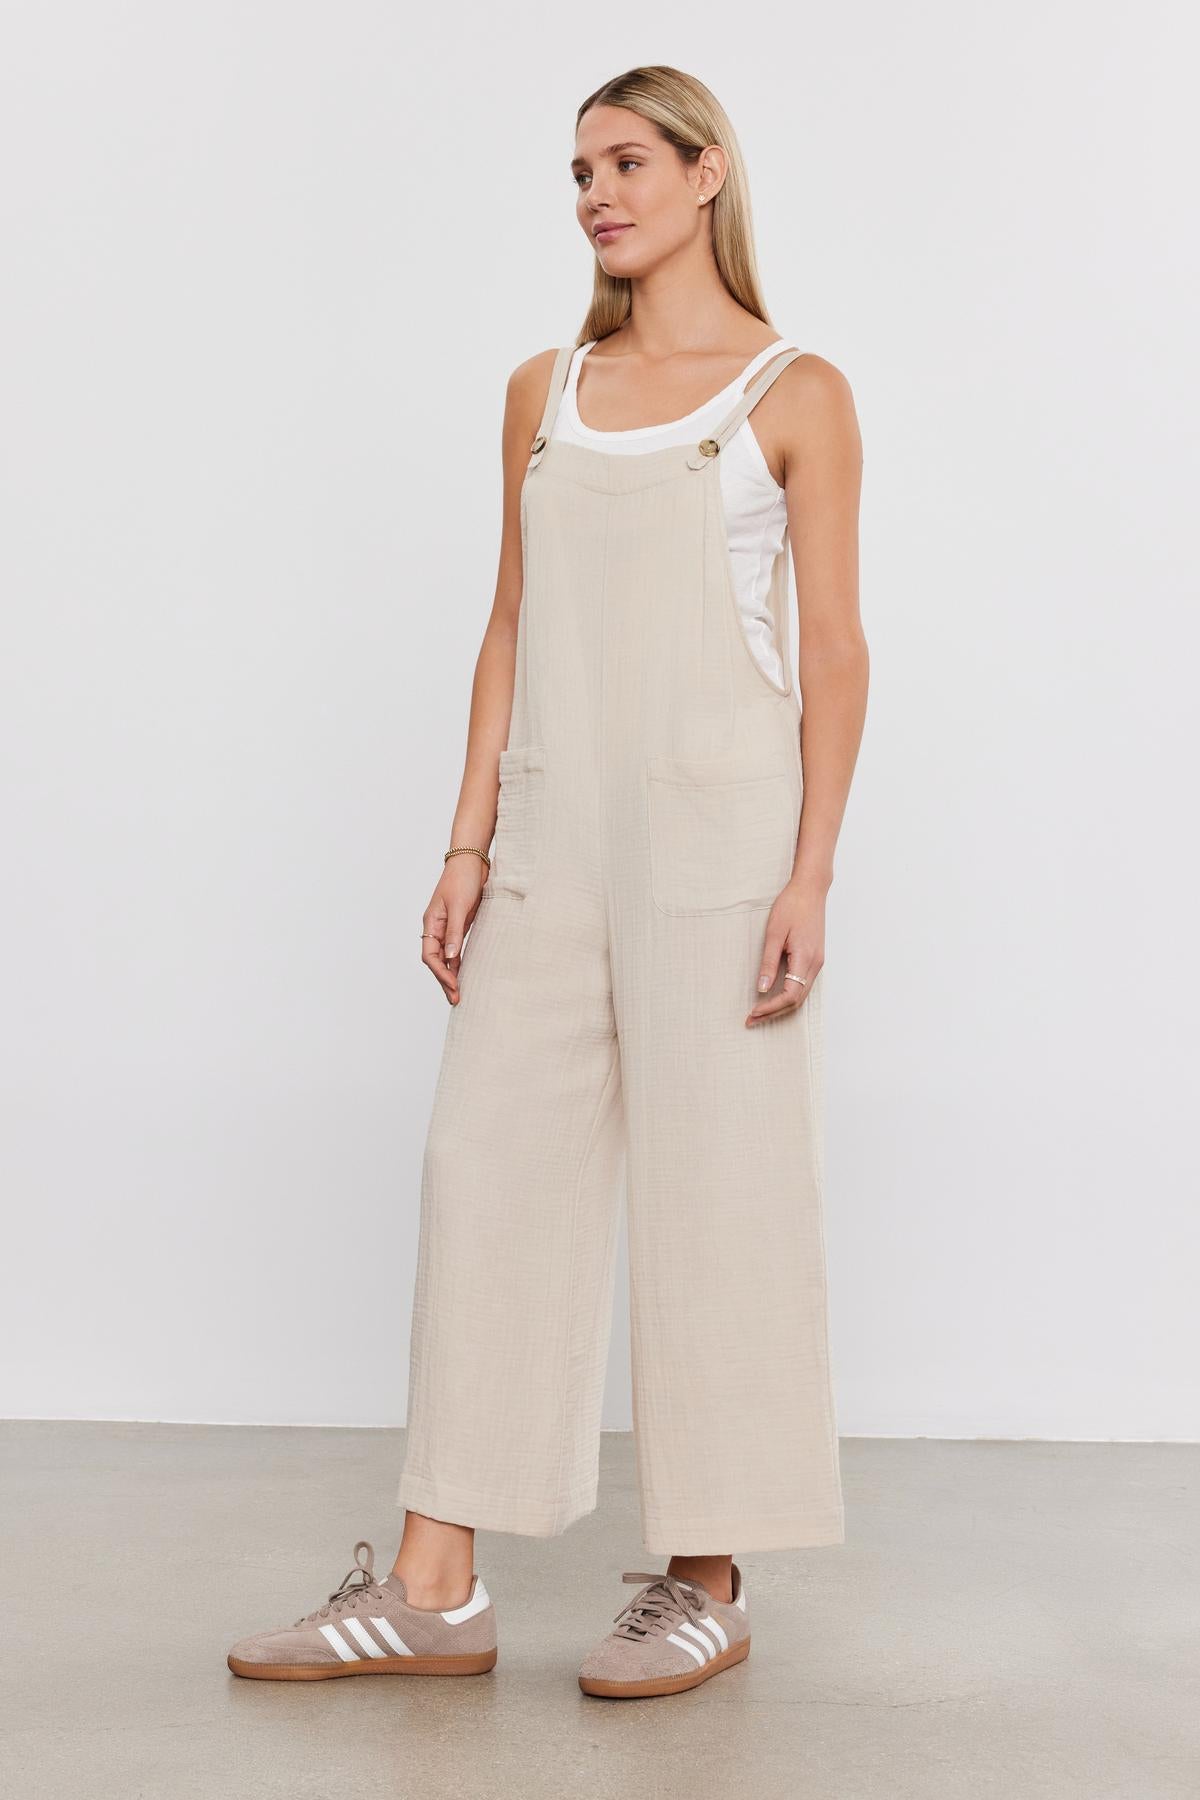 Woman standing in a studio, wearing a Velvet by Graham & Spencer EVERLEE COTTON GAUZE JUMPSUIT with patch pockets and brown sneakers, looking to her left with a neutral expression.-36910029111489